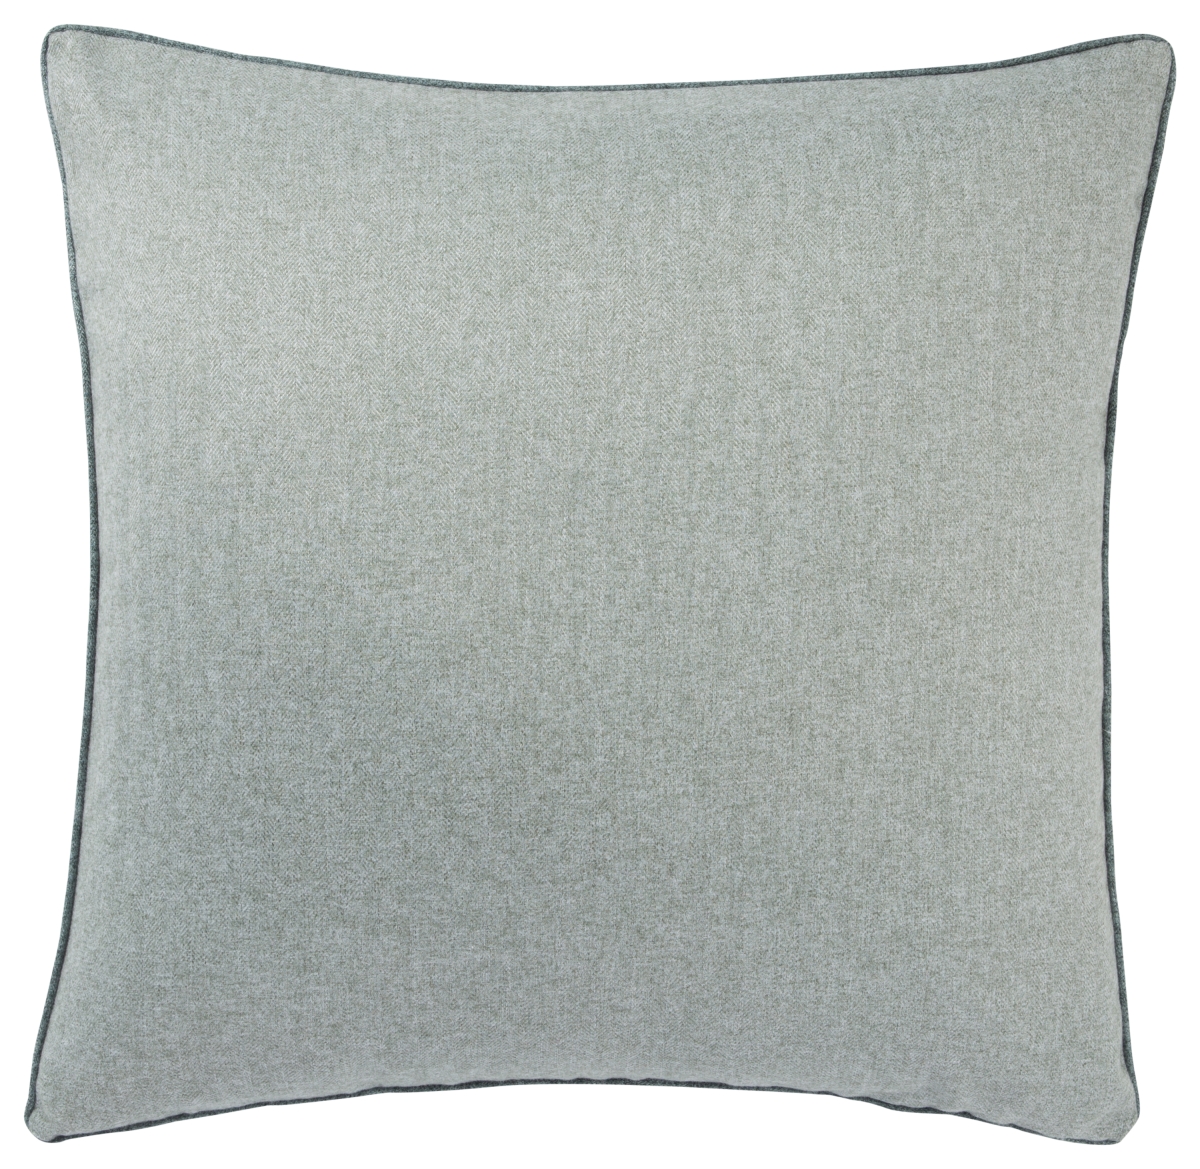 Plw103274 22 X 22 In. Pilcro Rollins Solid Light Blue Down Throw Pillow